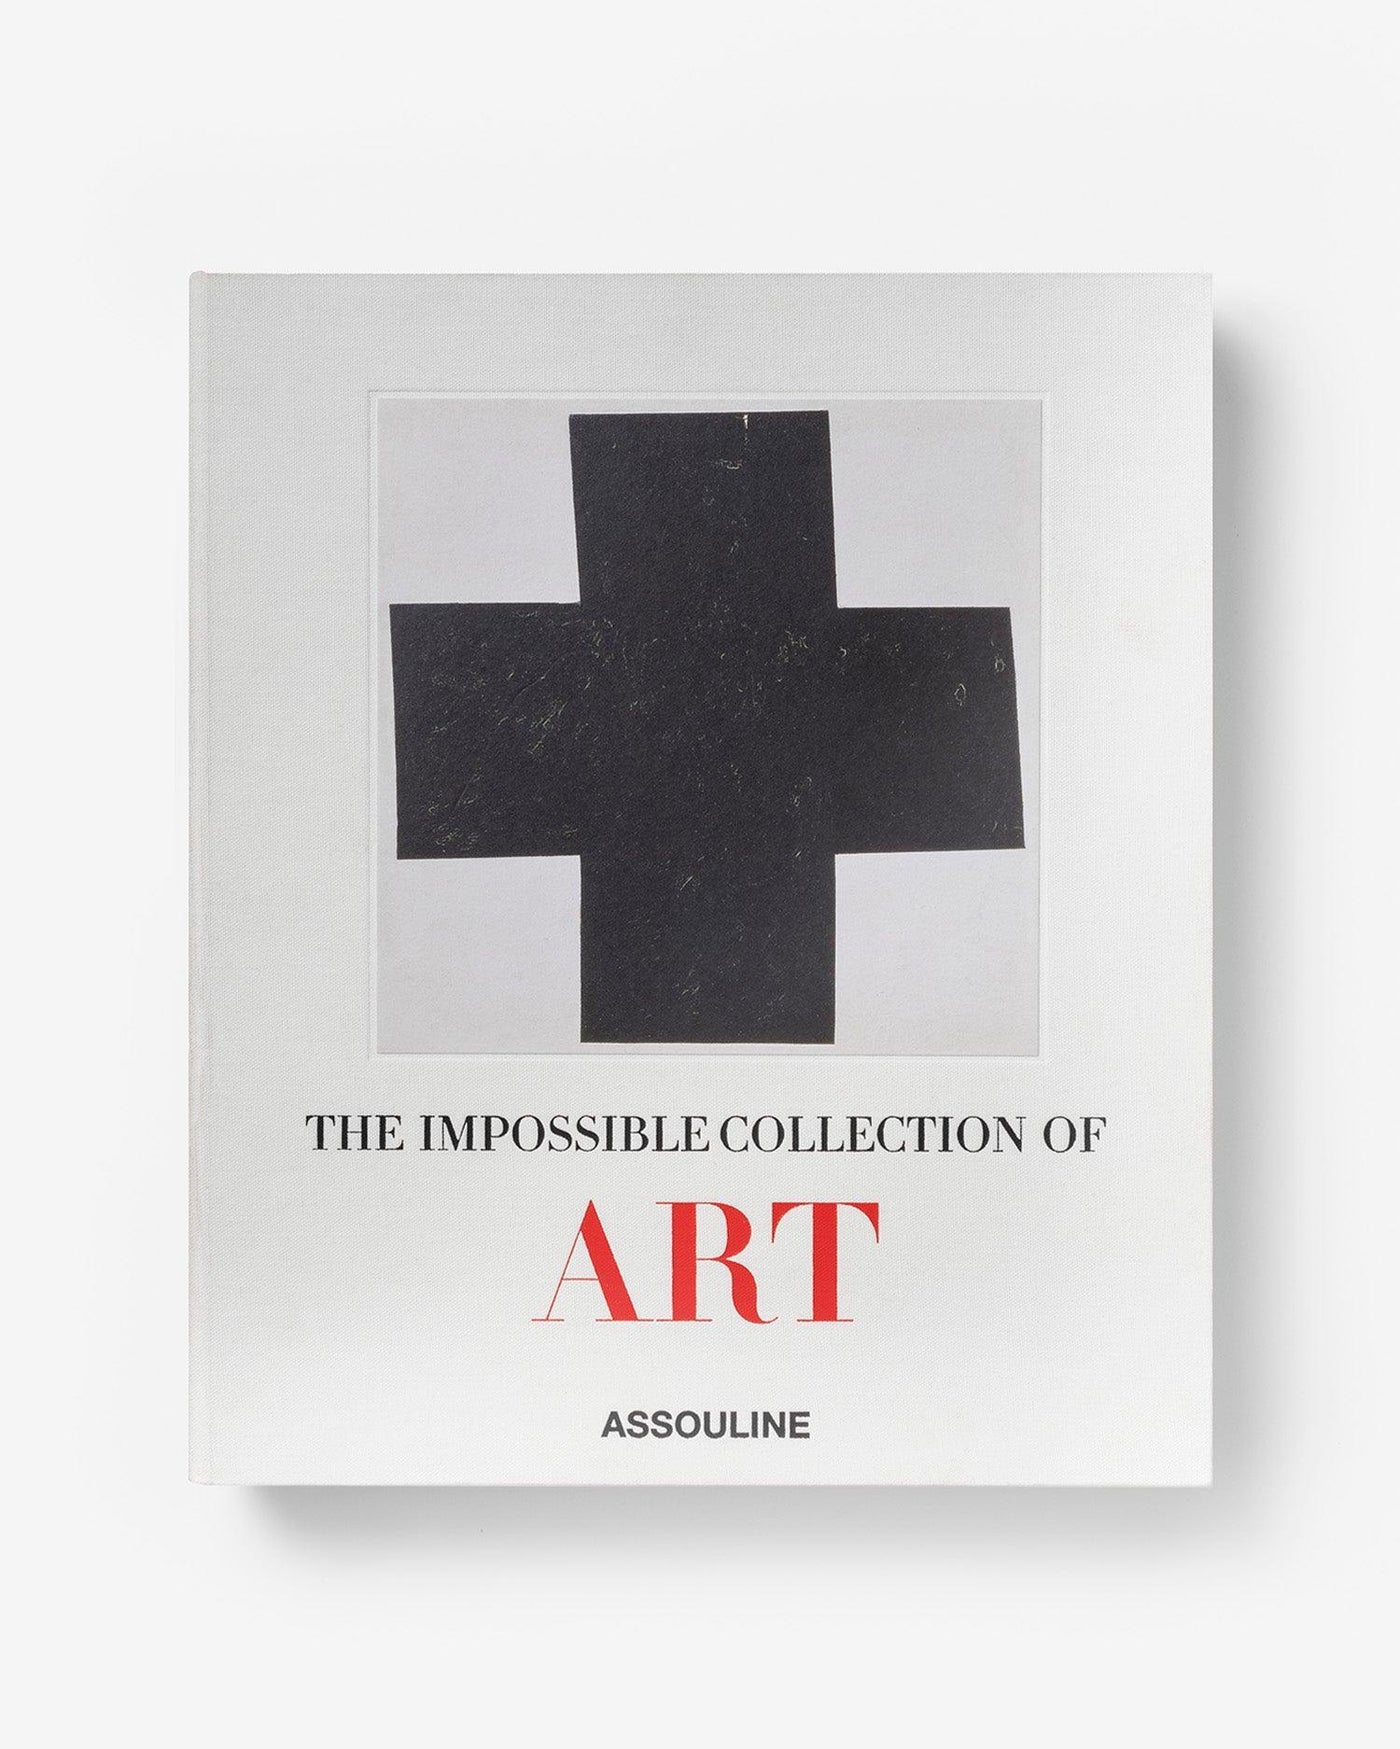 Art: The Impossible Collection